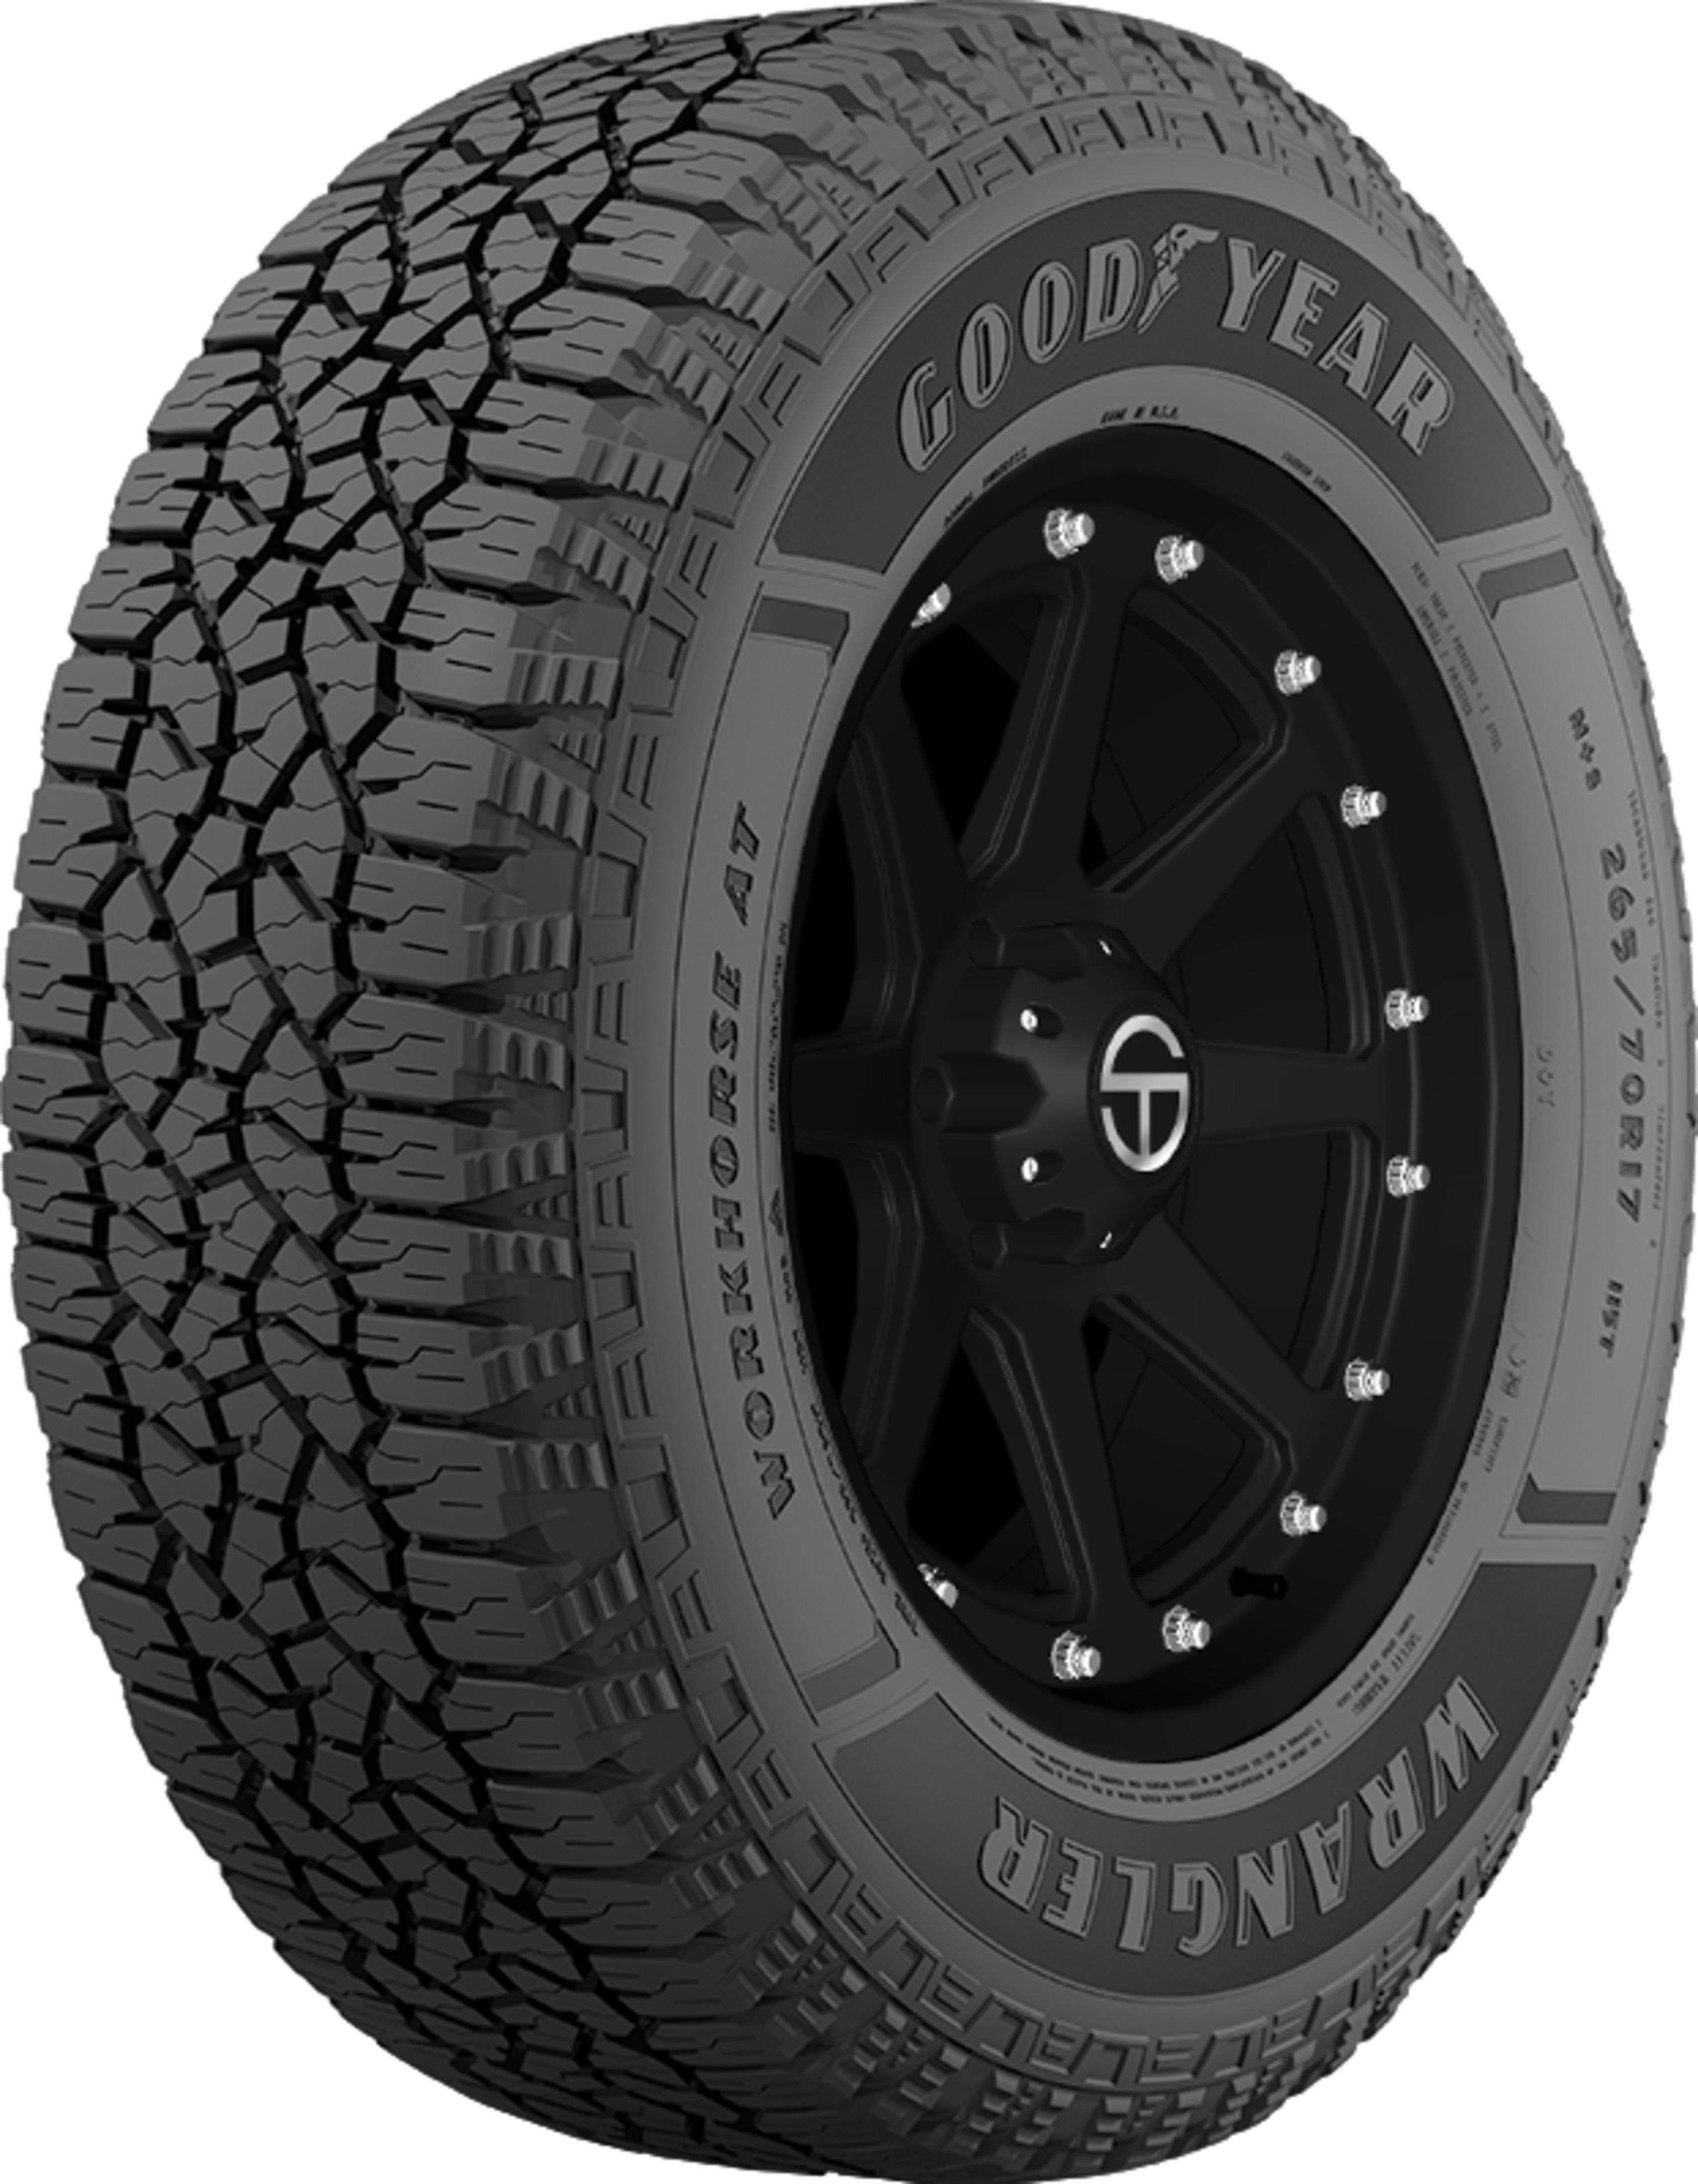 Buy Goodyear Wrangler Workhorse AT Tires Online | SimpleTire